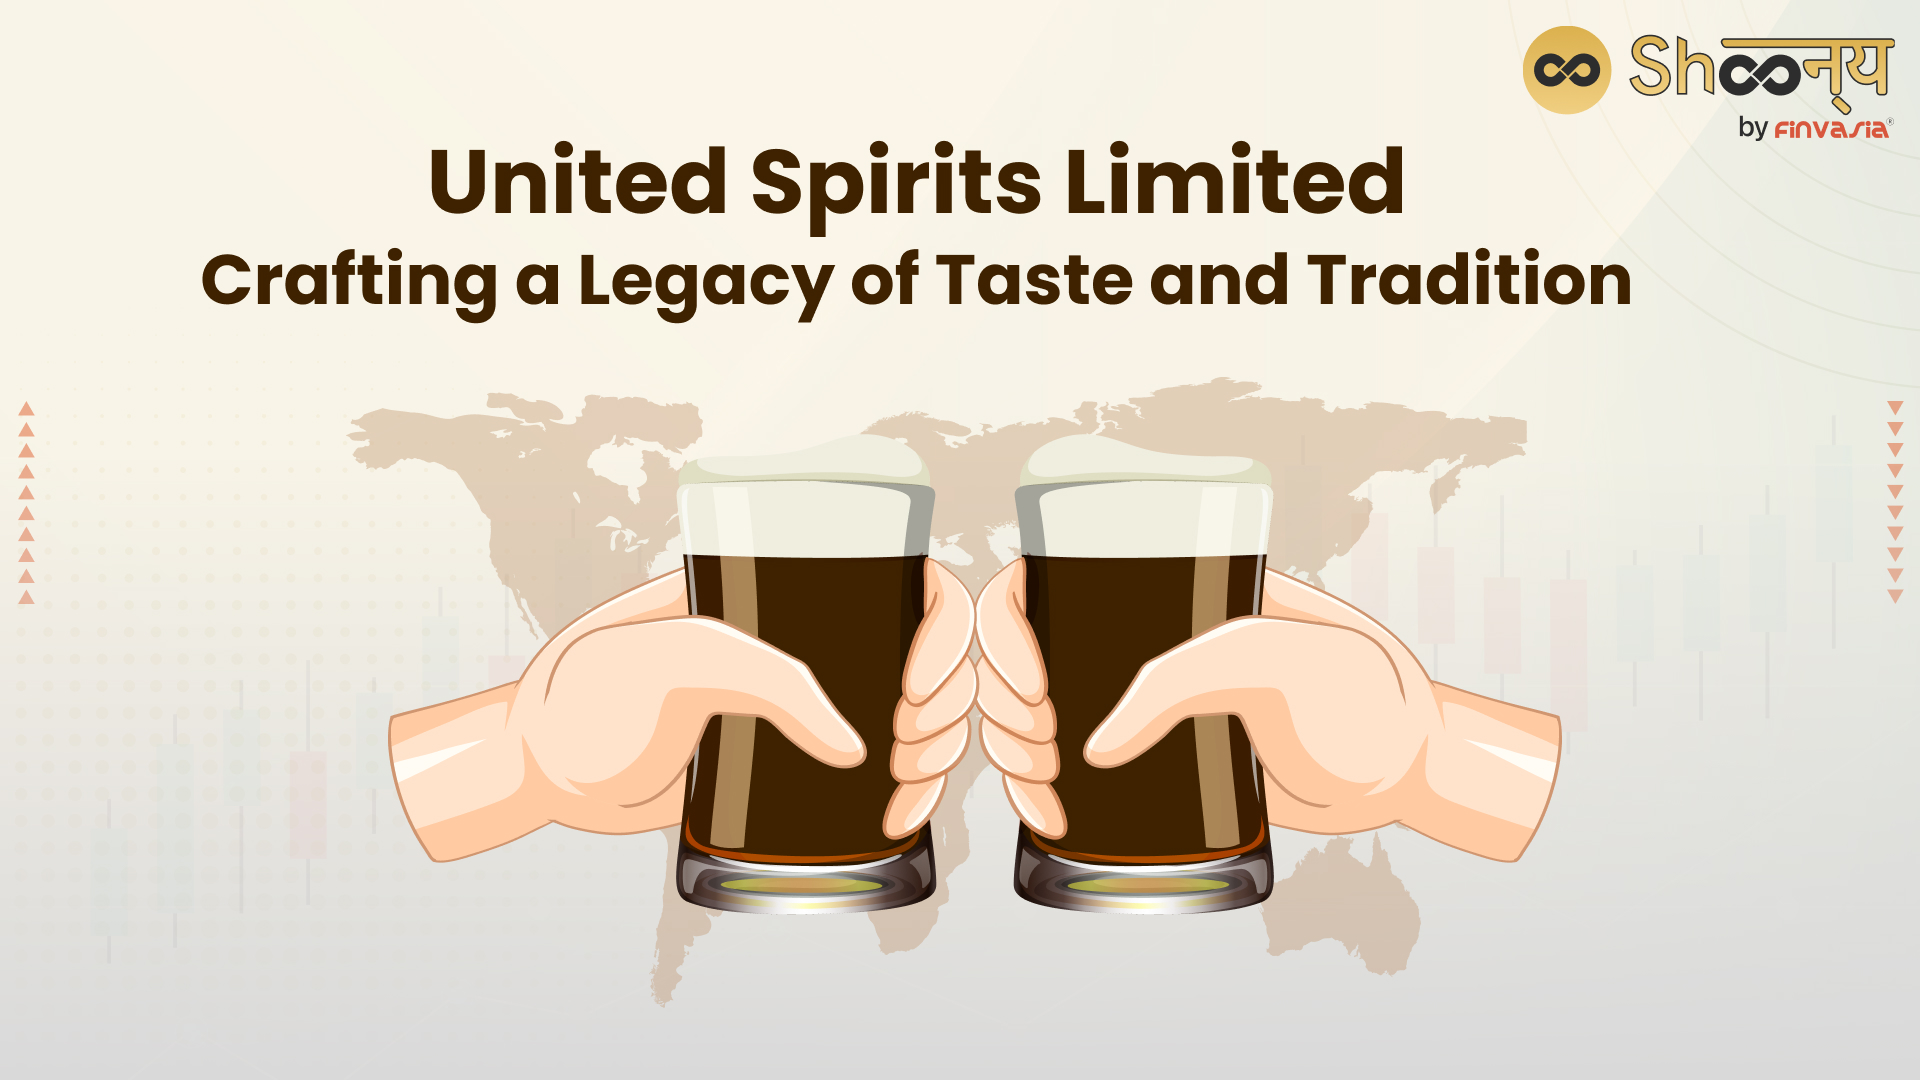 United Spirits Limited: Popular Products, Brands, and History